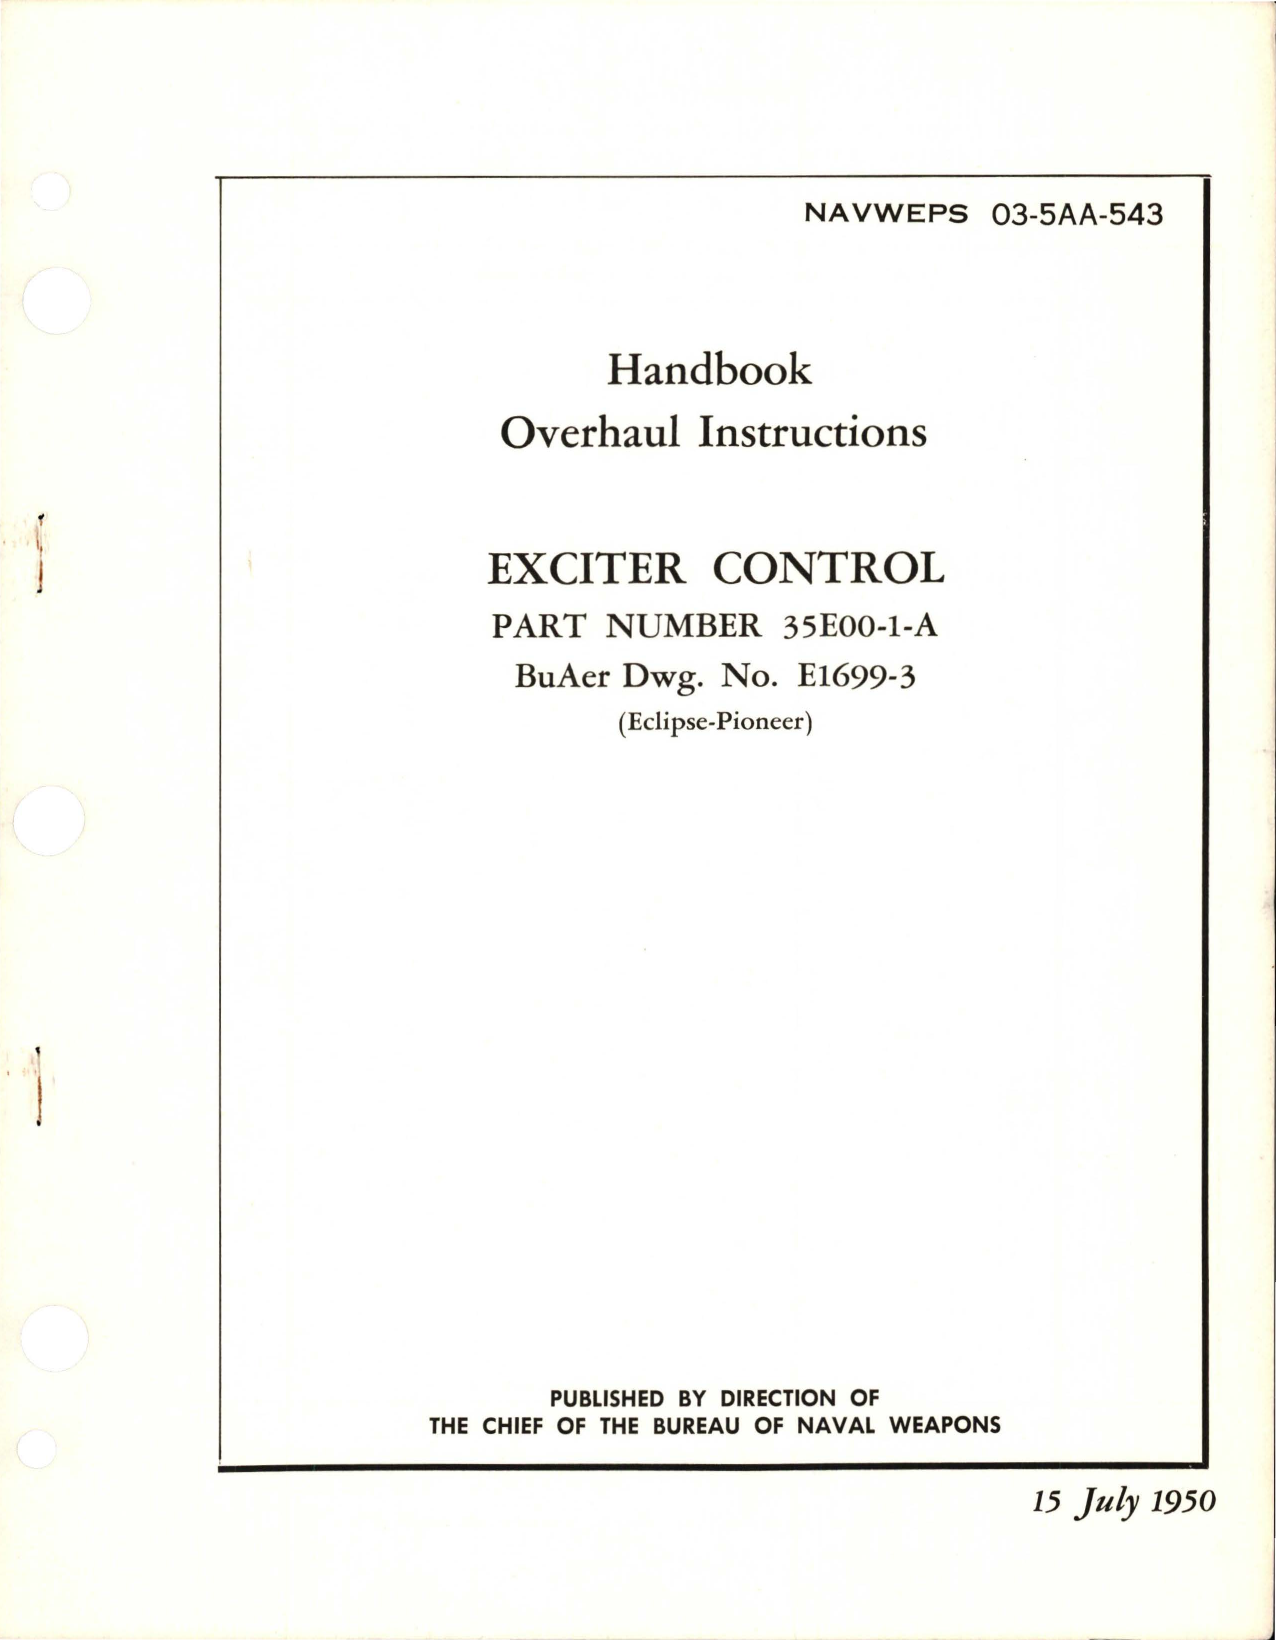 Sample page 1 from AirCorps Library document: Overhaul Instructions for Exciter Control - Part 35E00-1-A